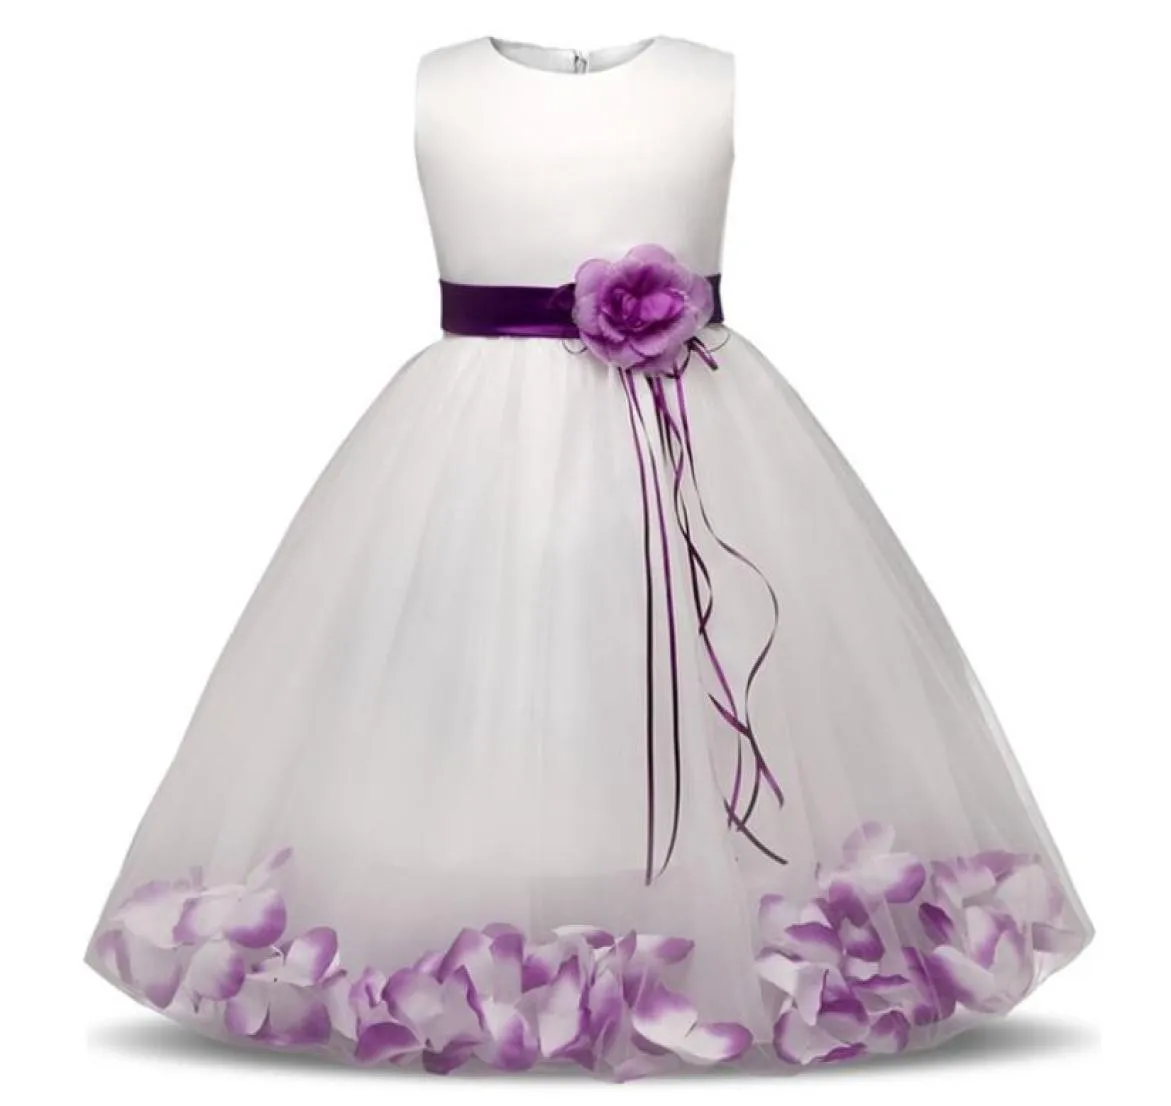 Flower Girl Baby Wedding Dress Fairy Petals Children039s Clothing Party Kids Clothes Fancy Teenage Gown 4 6 8 10T 2107279824622